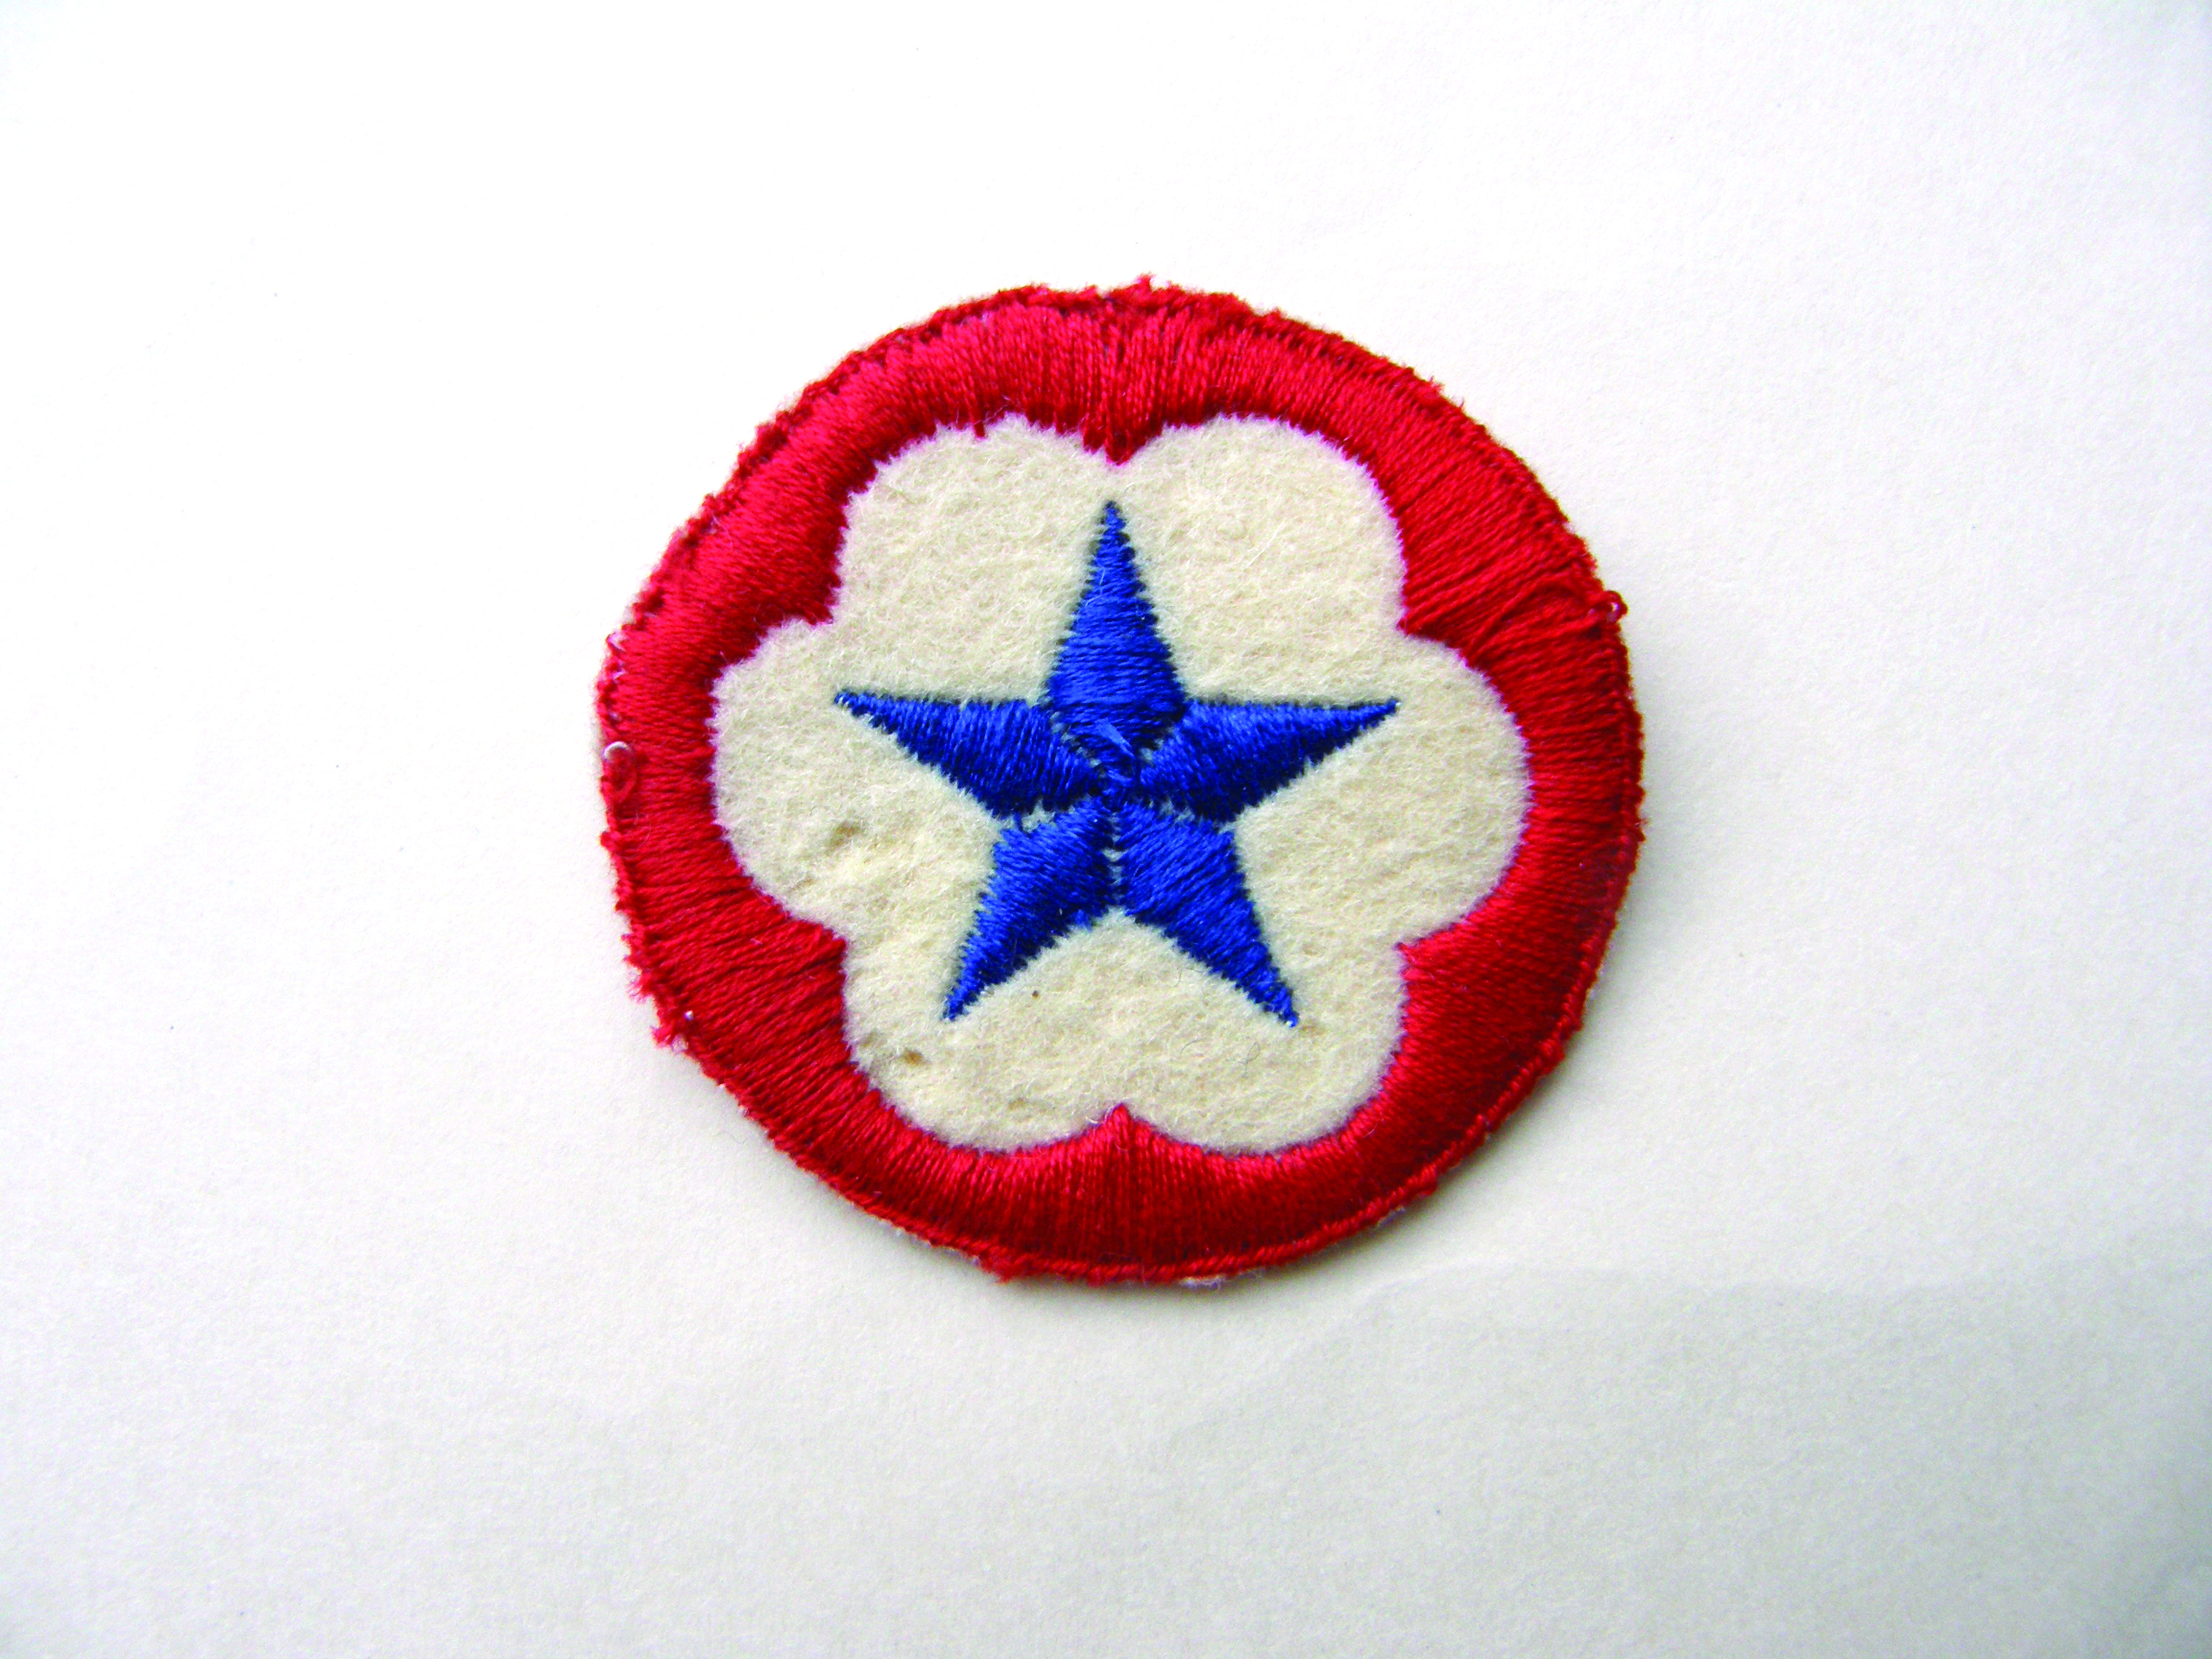 The first patch used by TDS, commonly known as the “Texaco star.” (Photo courtesy of Fred Borch III)